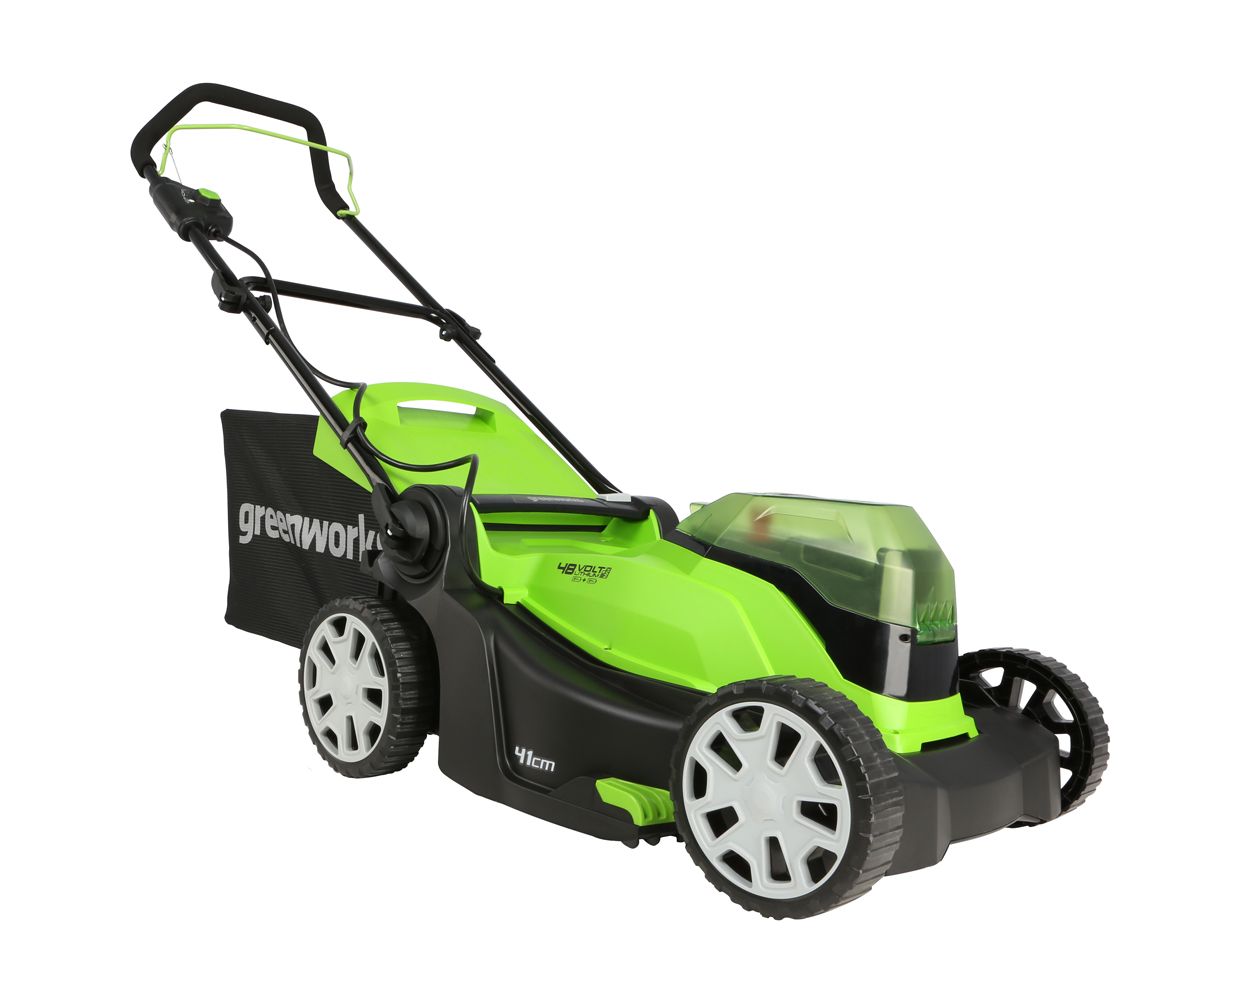 Greenworks 40V 46cm Lawn Mower with 4Ah battery 2A charger